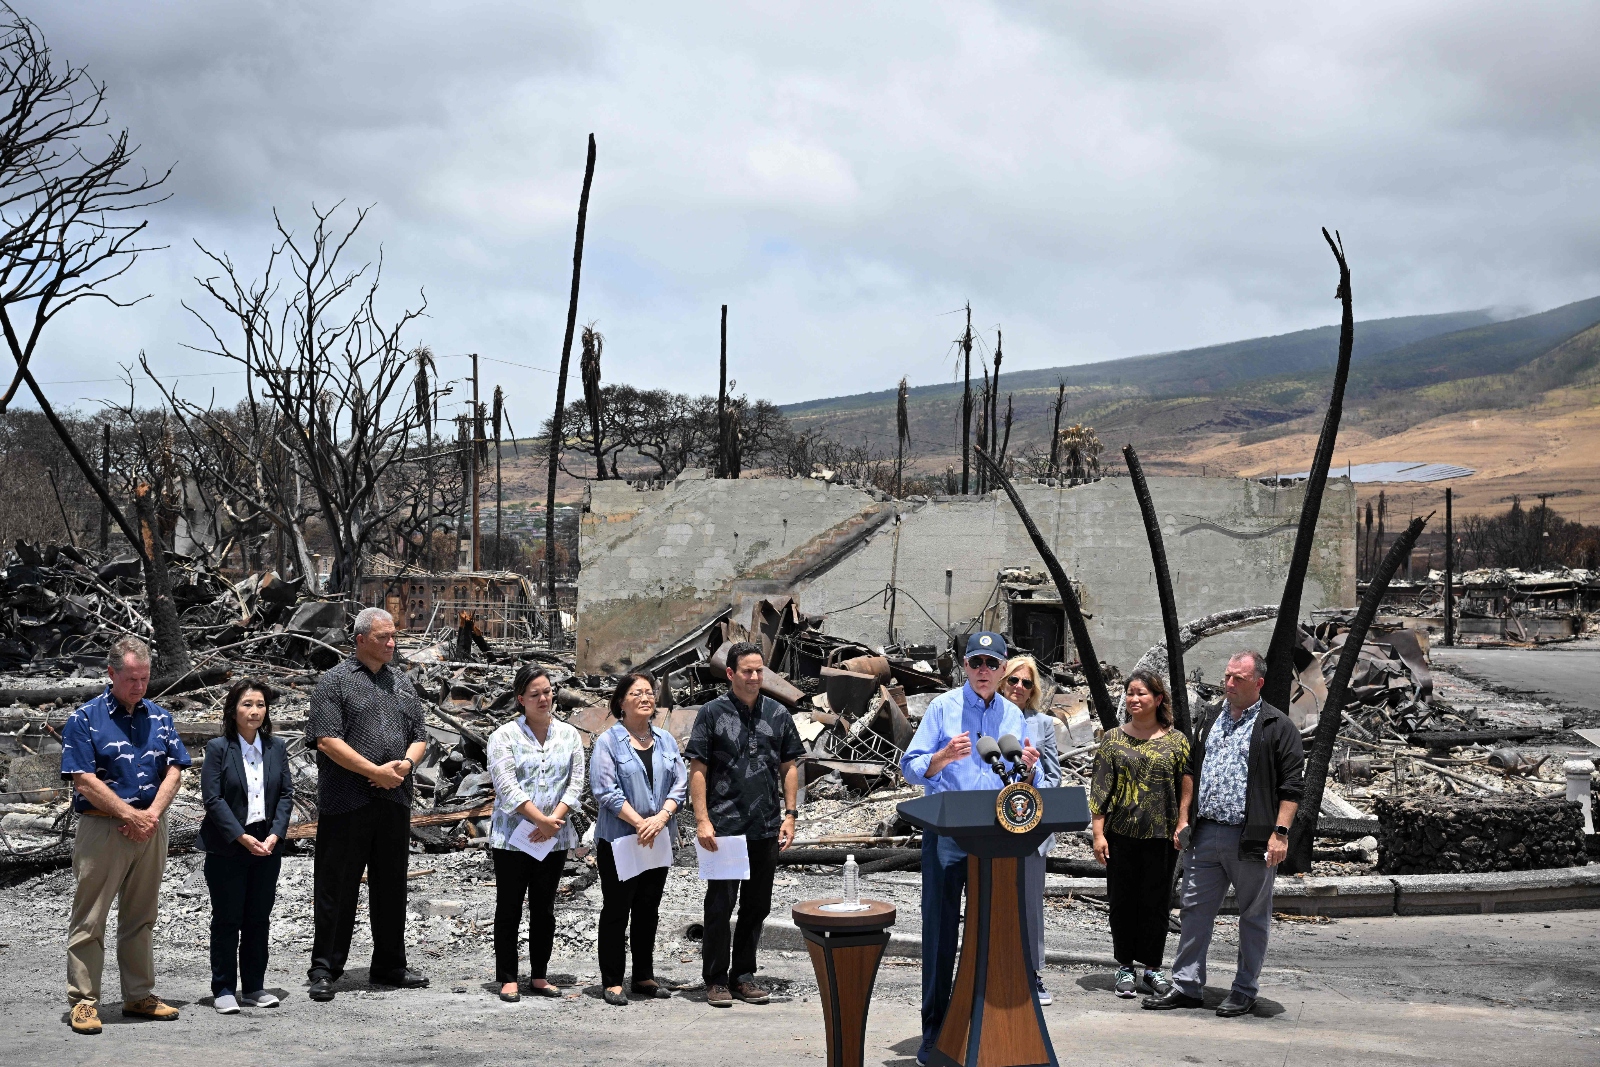 President Joe Biden delivers remarks as he visits an area devastated by the West Maui wildfire in August. The wildfire was the deadliest in modern U.S. history.